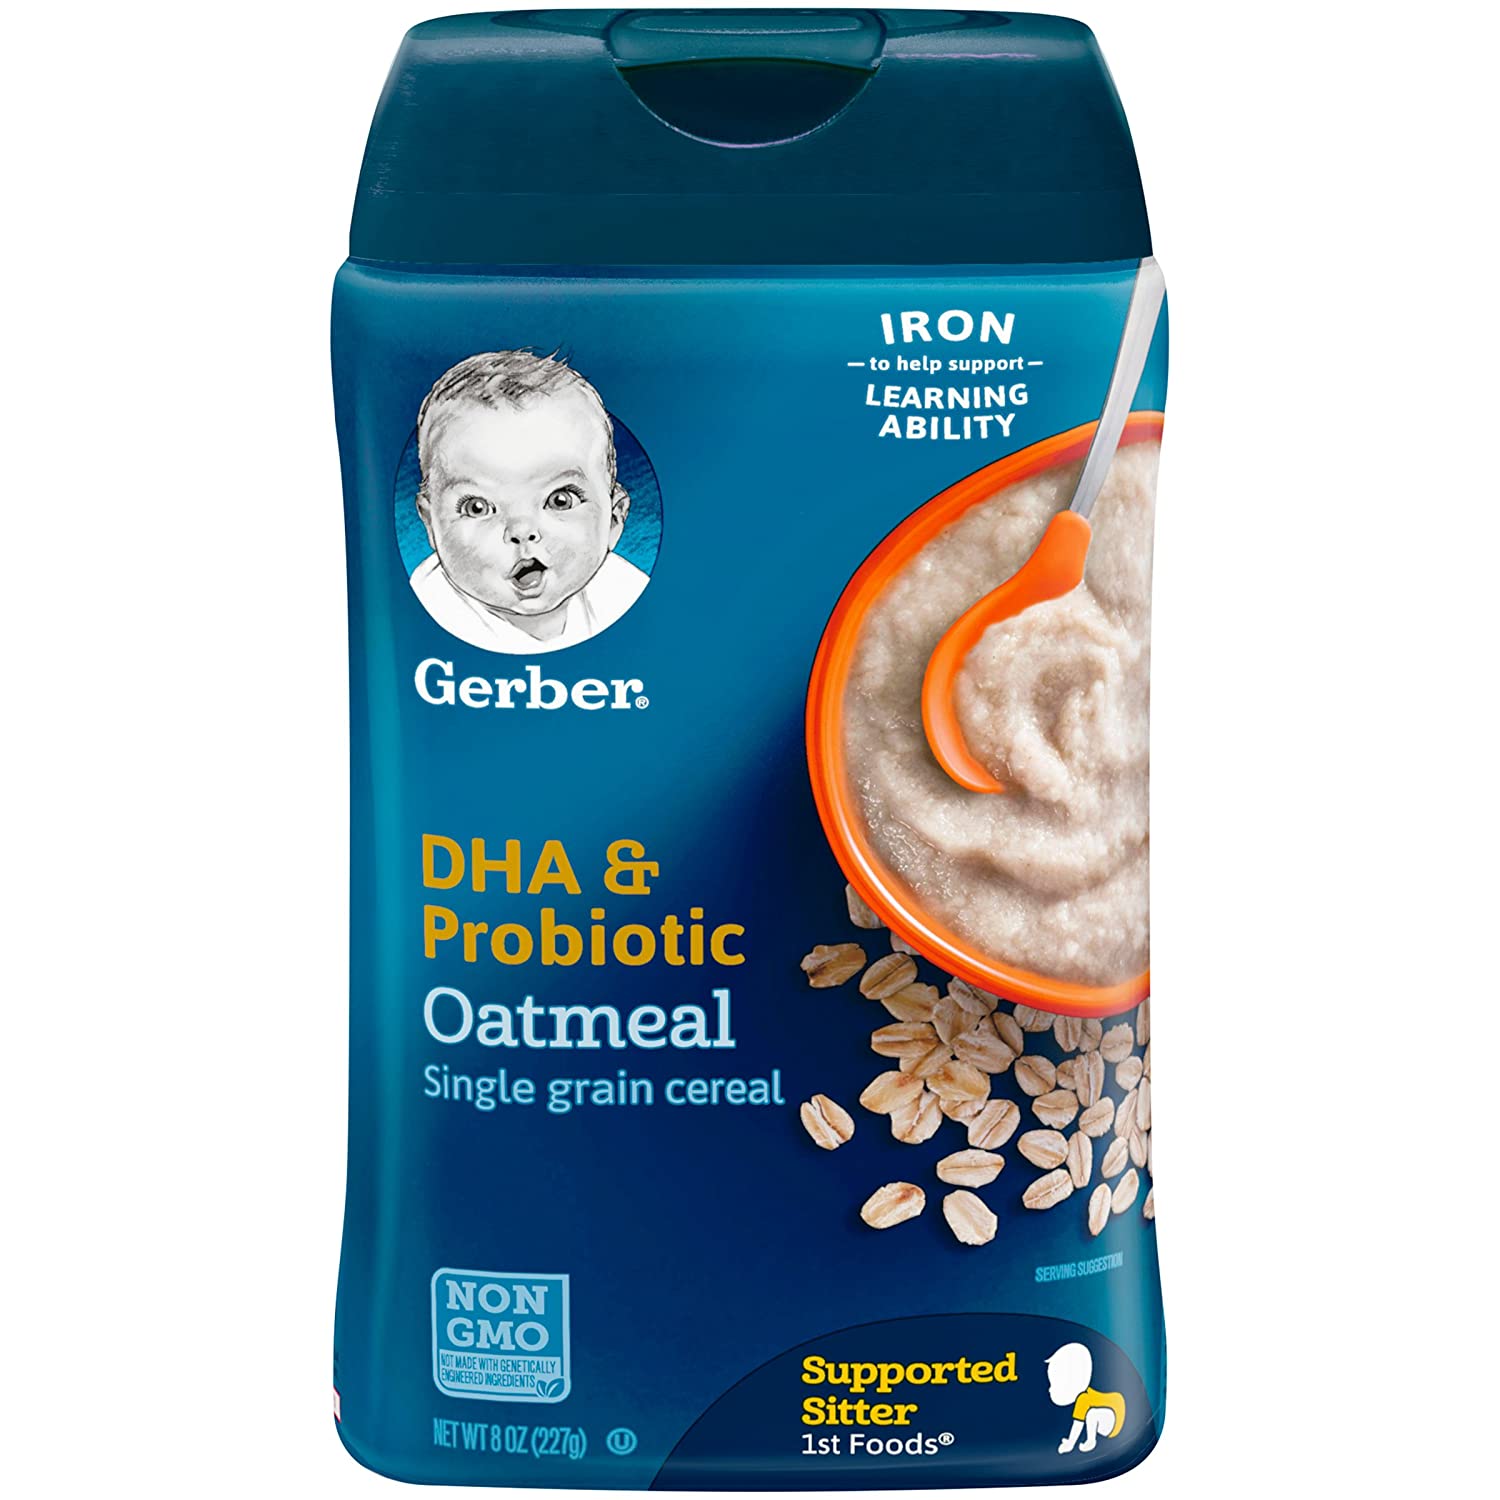 Gerber Baby Cereal DHA and Probiotic Oatmeal